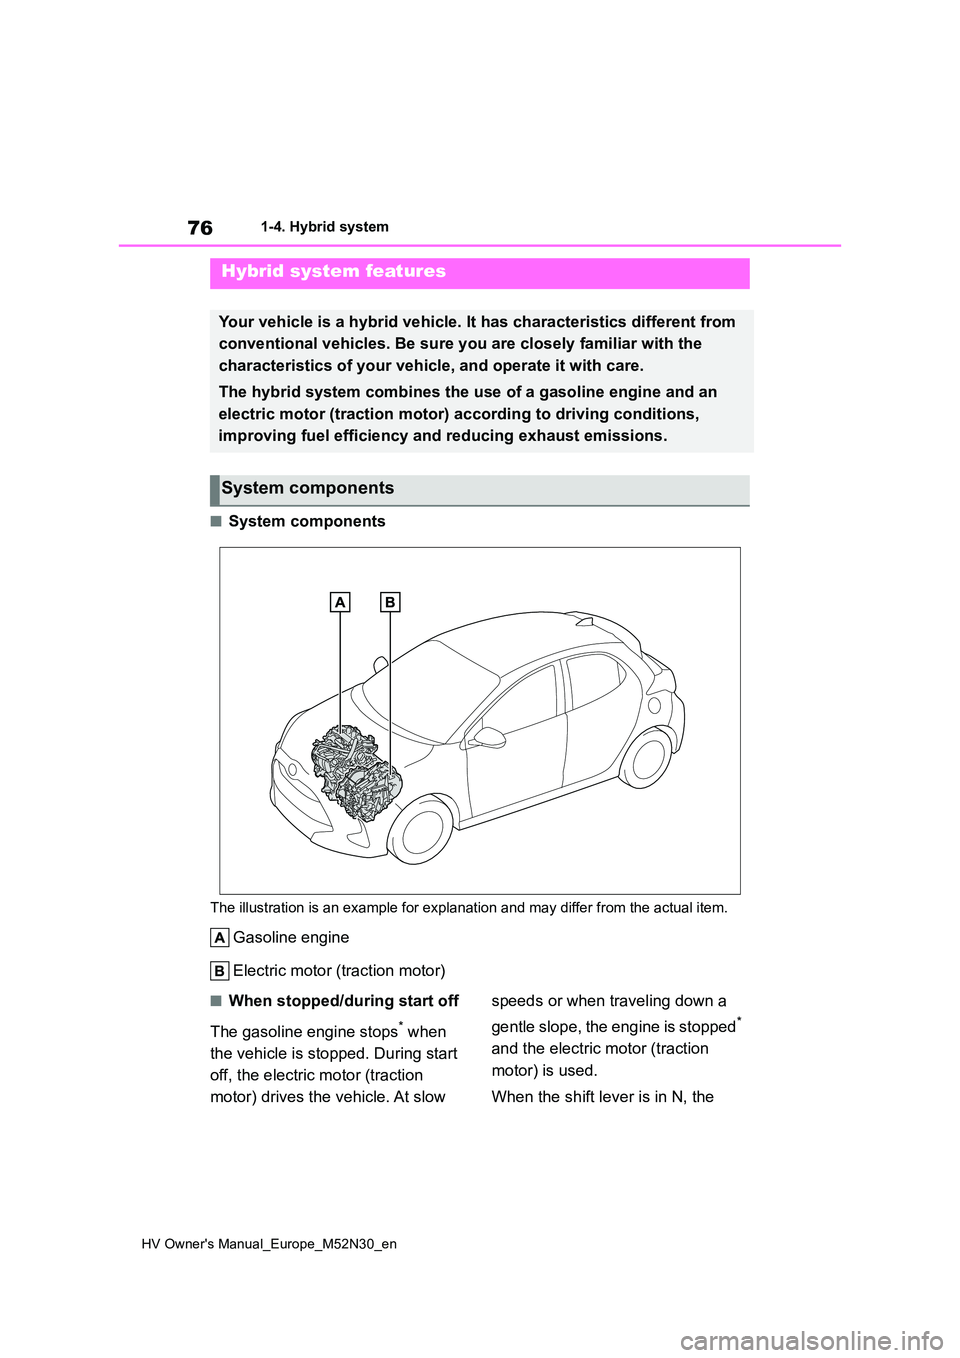 TOYOTA YARIS 2022  Owners Manual 76
HV Owner's Manual_Europe_M52N30_en
1-4. Hybrid system
1-4.Hybrid  sy stem
■System components
The illustration is an example for explanation and may differ from the actual item.
Gasoline engin